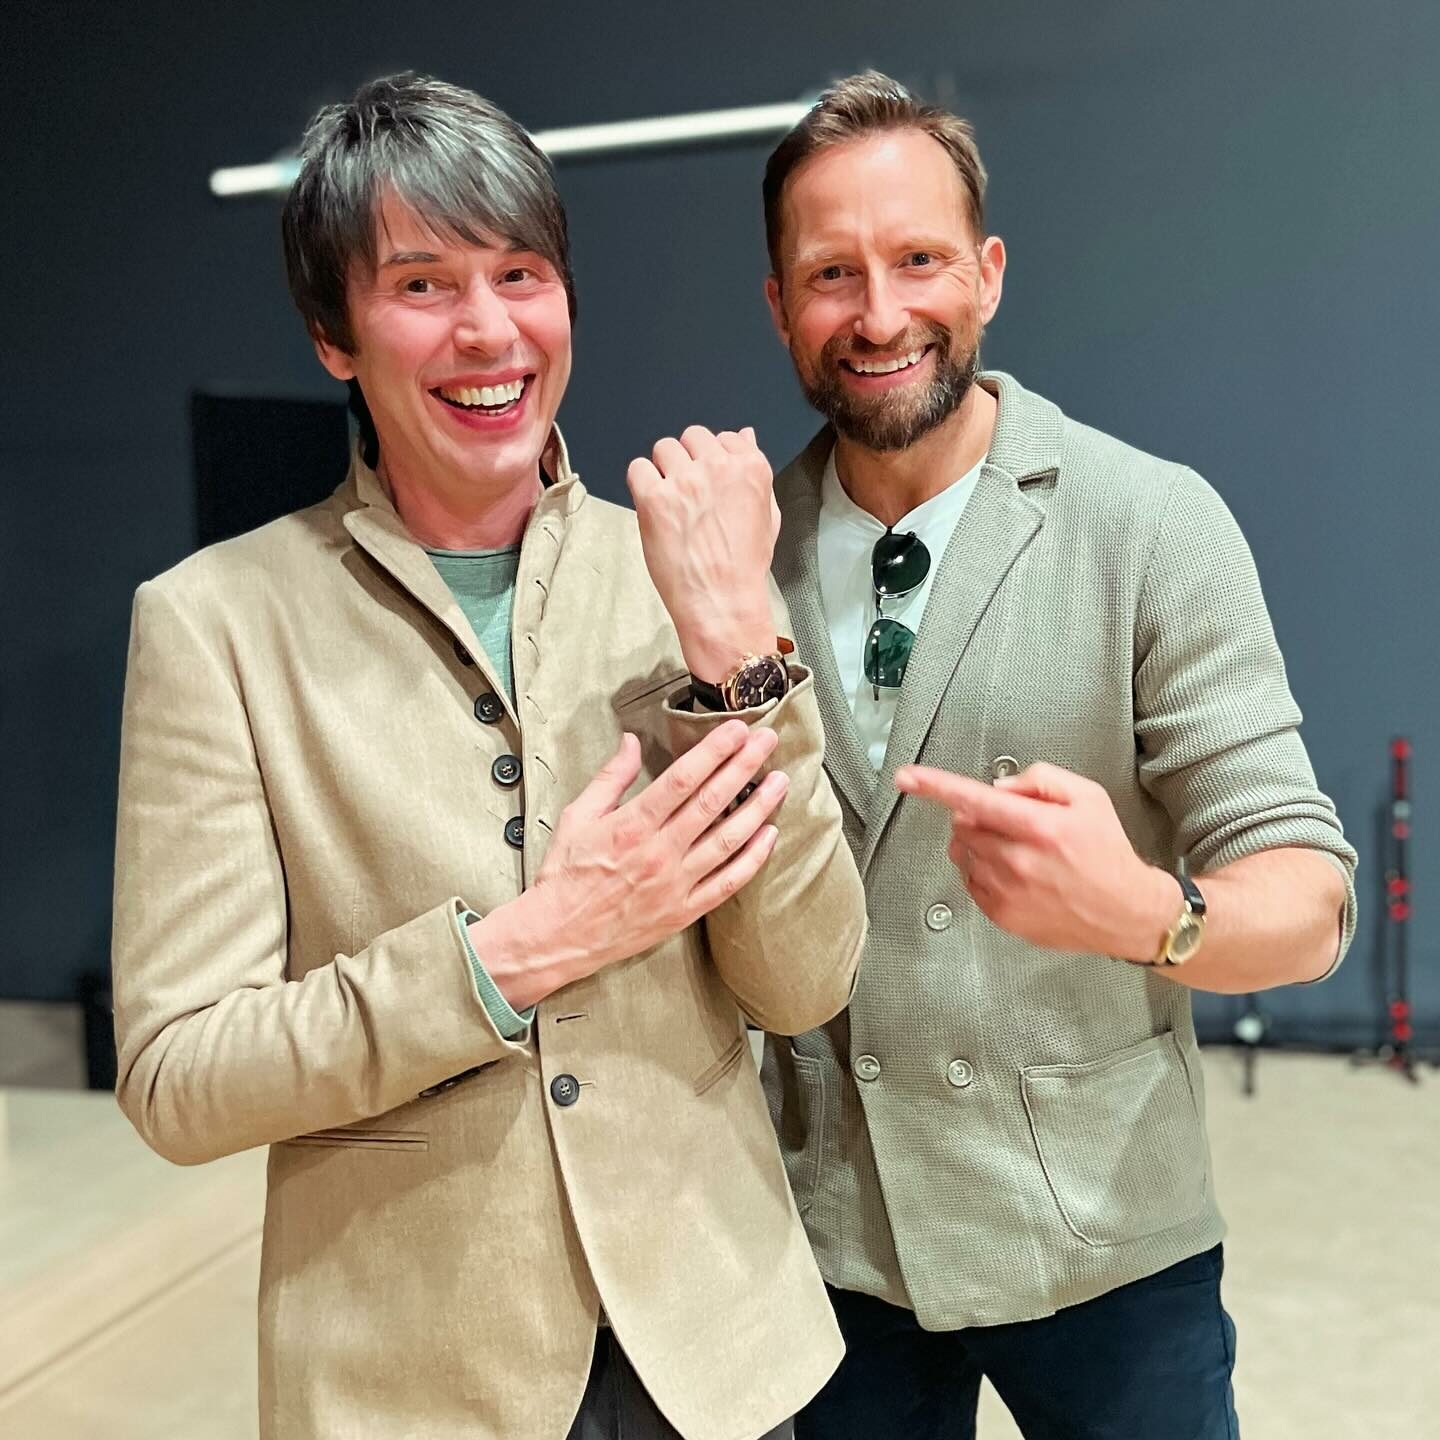 Andrew weighs in on influencer marketing in the watch industry with Vogue Business